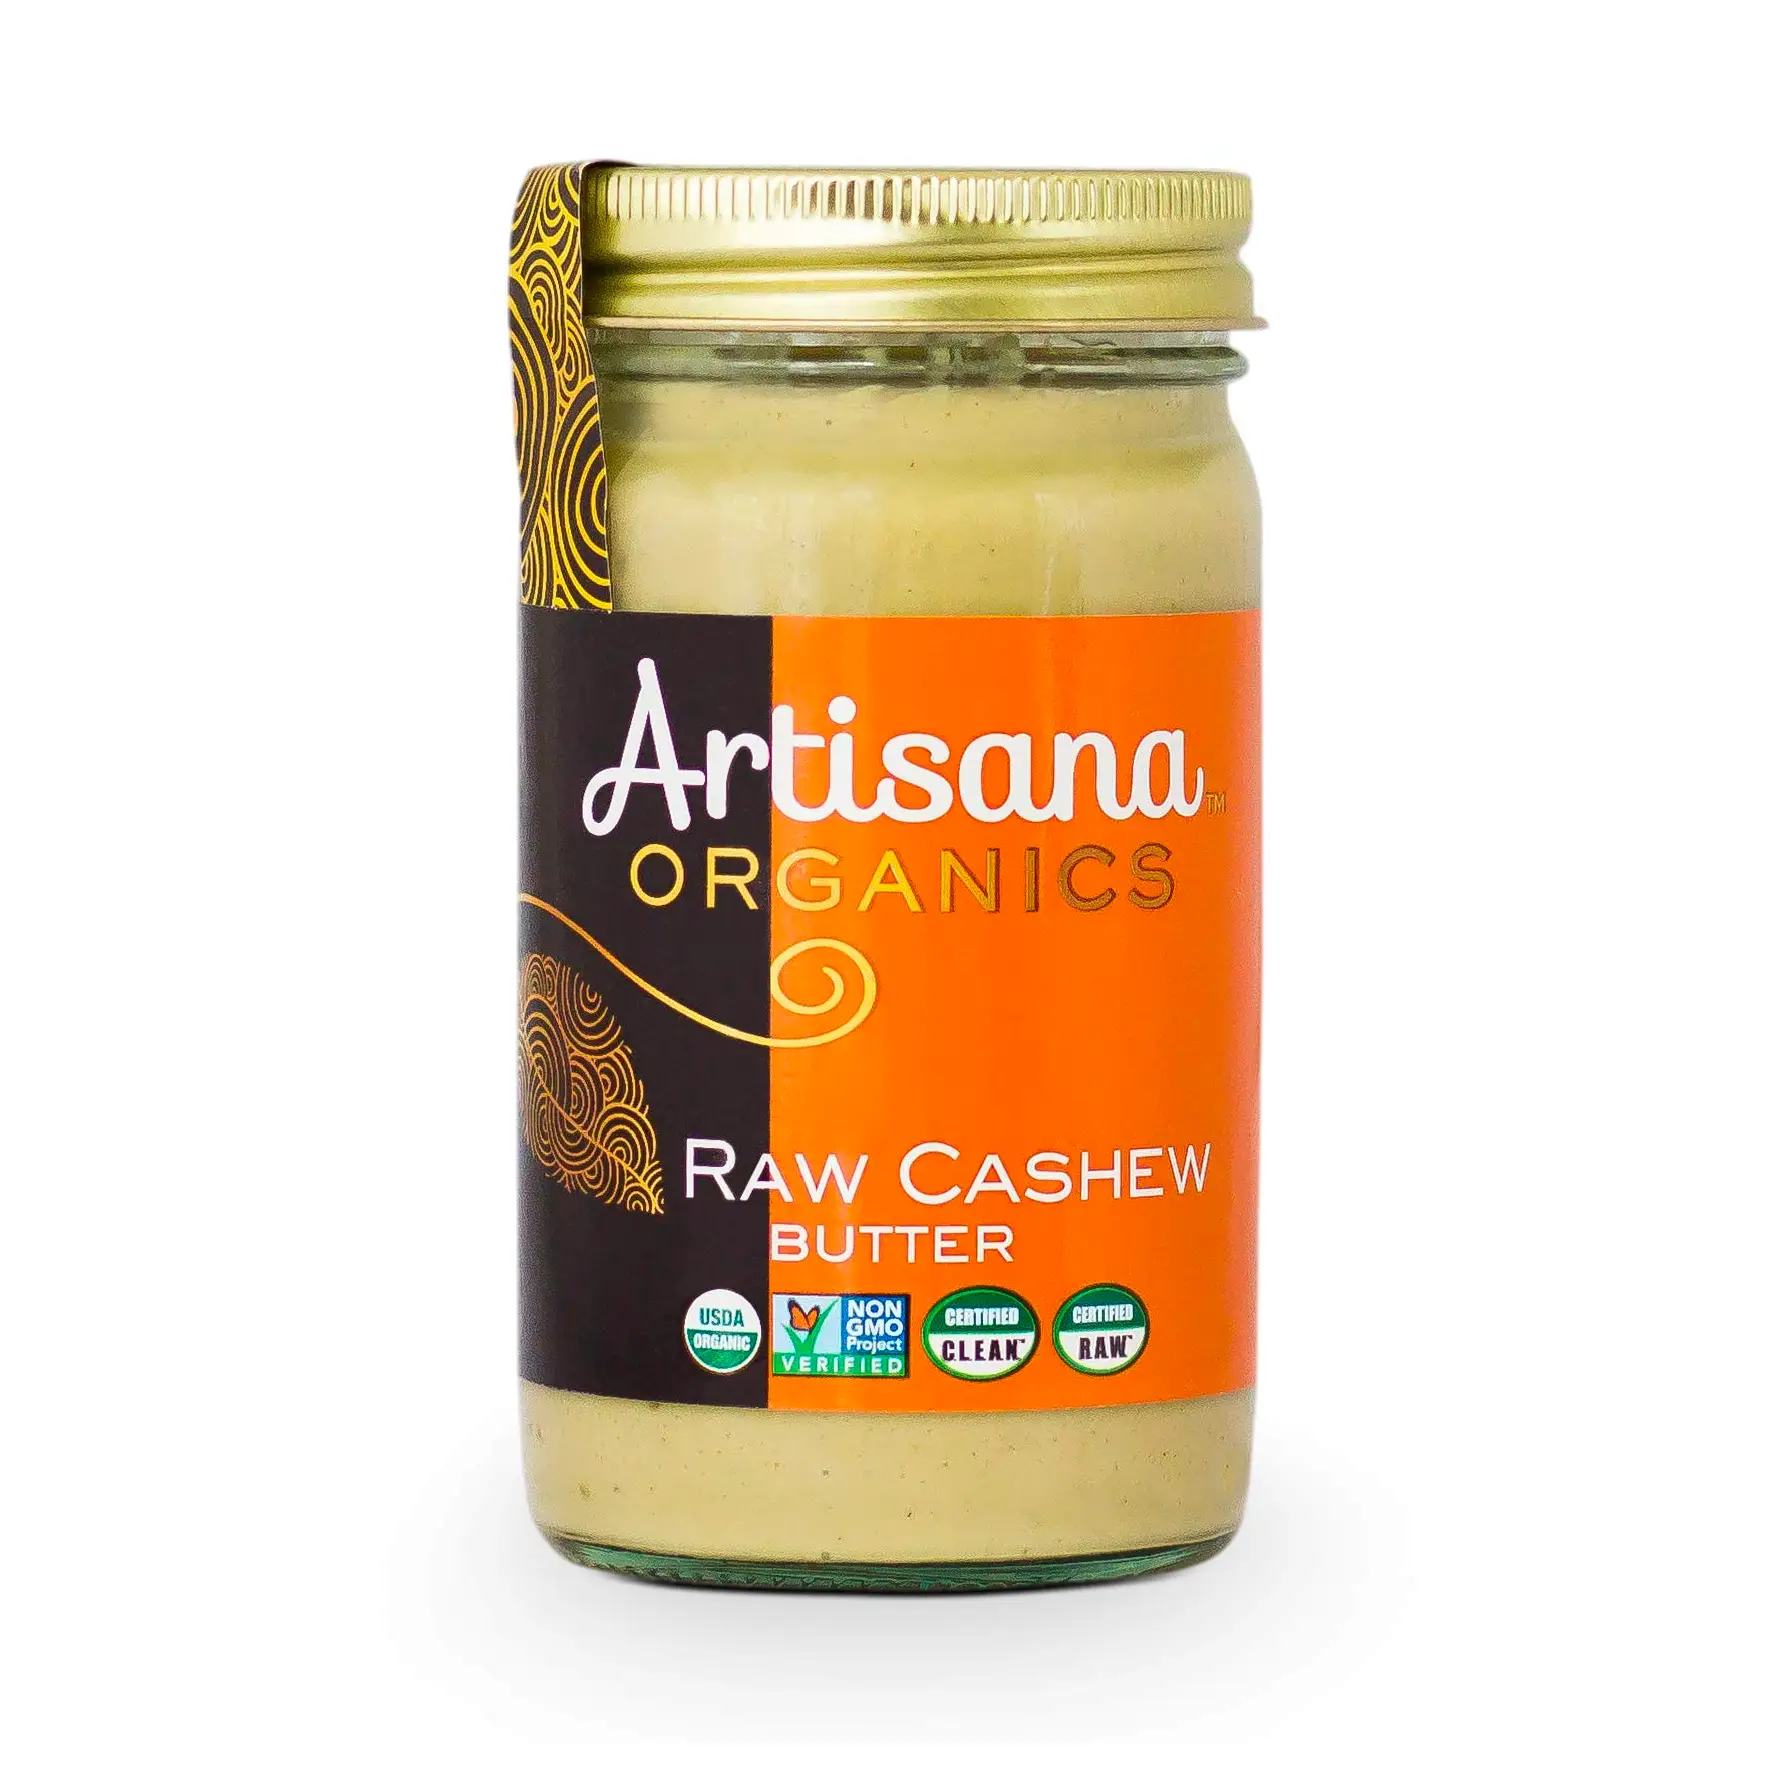 Raw Cashew Butter Delivery